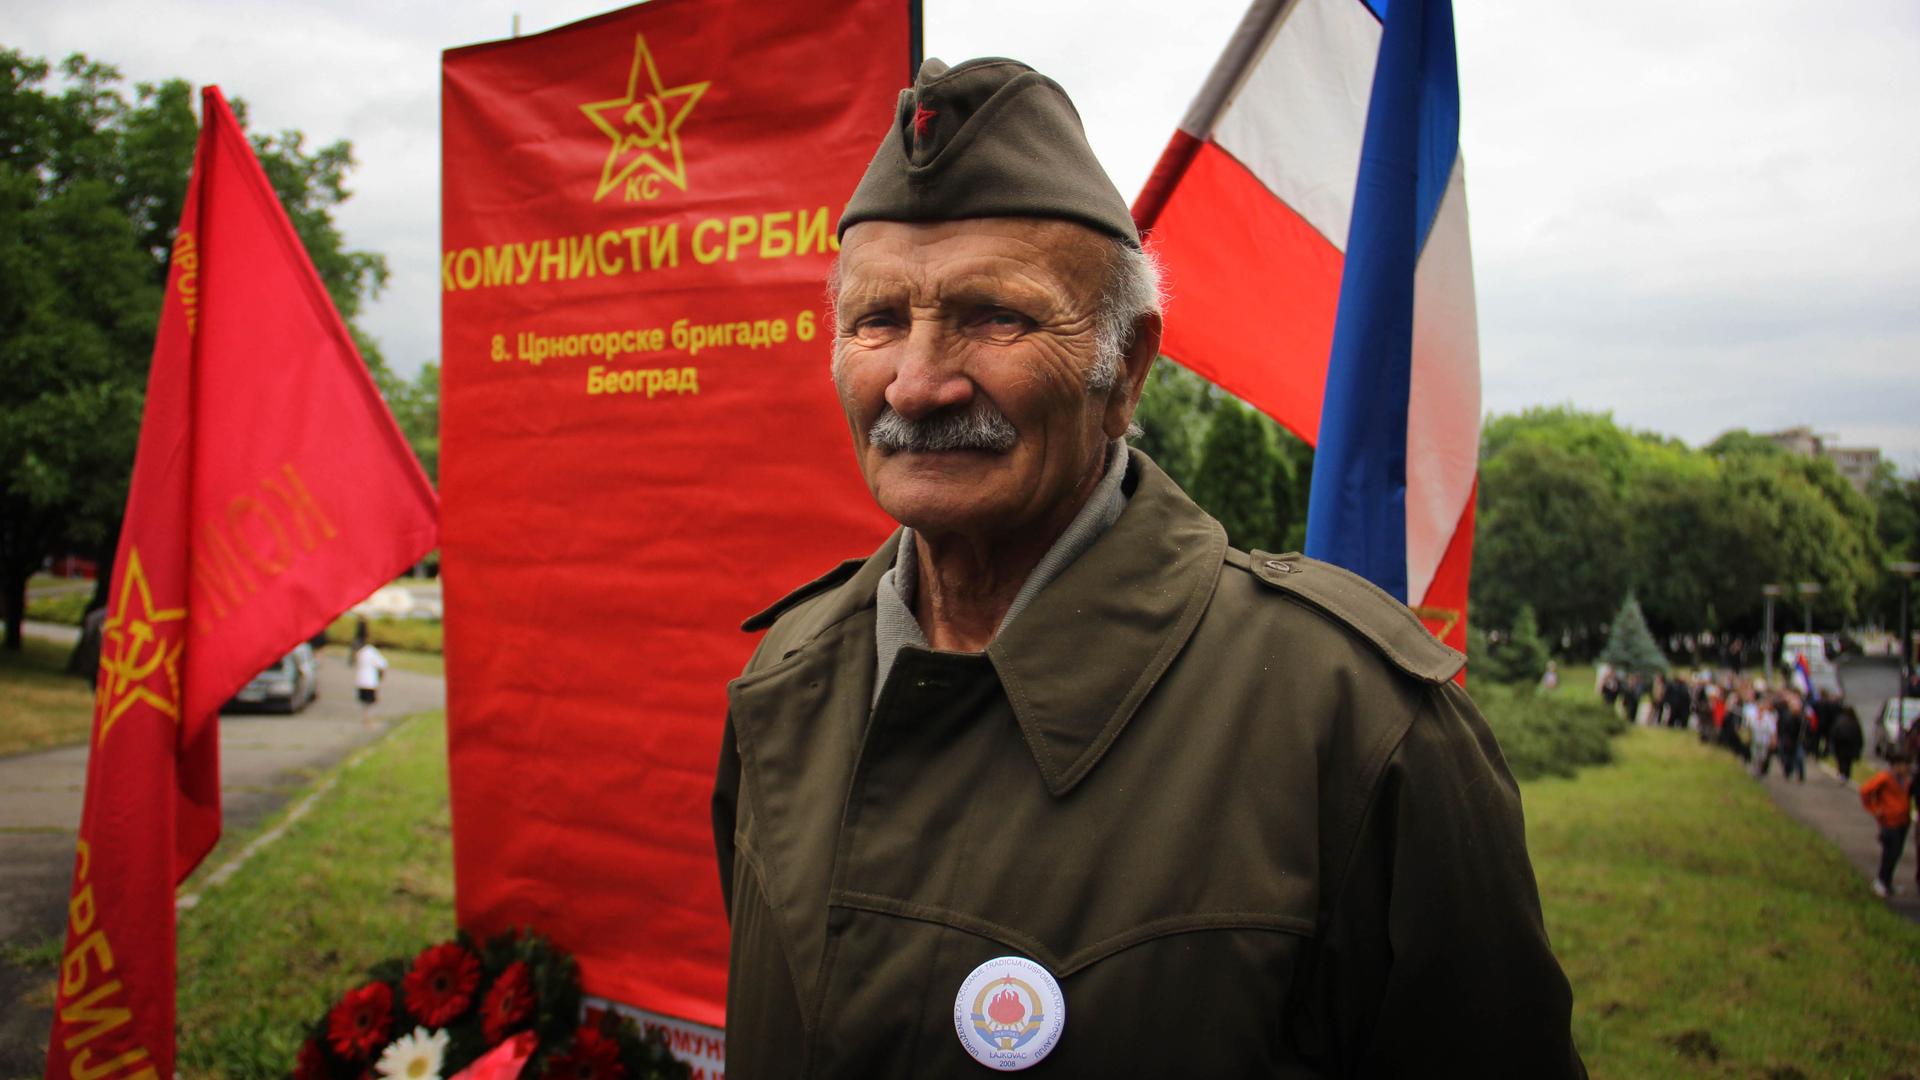 Man stands in front of a banner for the Serbian communists.